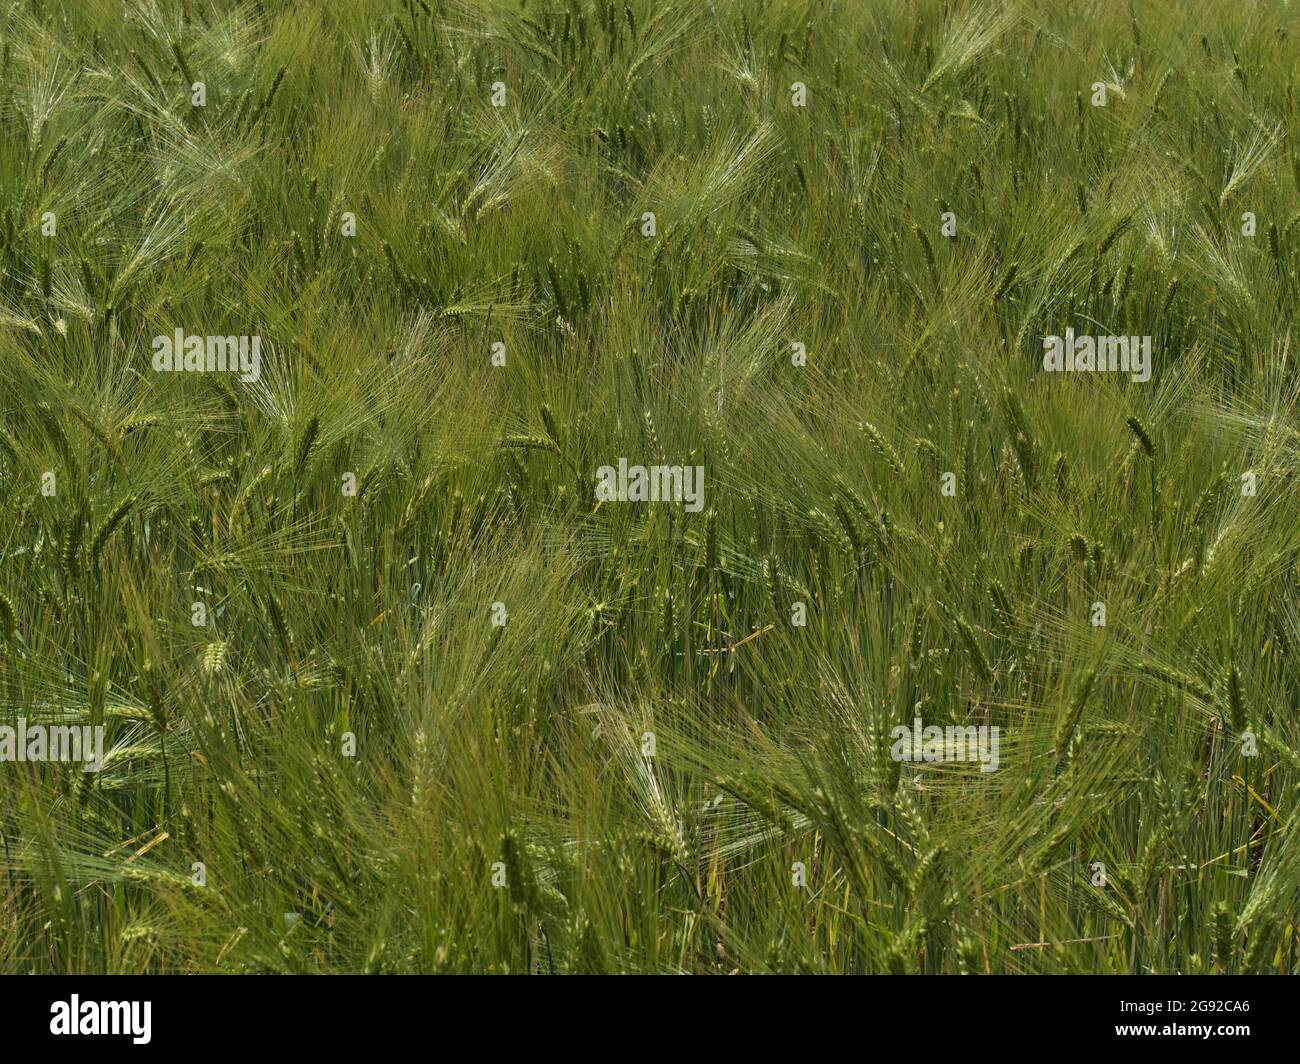 Closeup view of agricultural grain field with barley plants (hordeum vulgare) with green colored pattern in summer season in Swabian Alb, Germany. Stock Photo